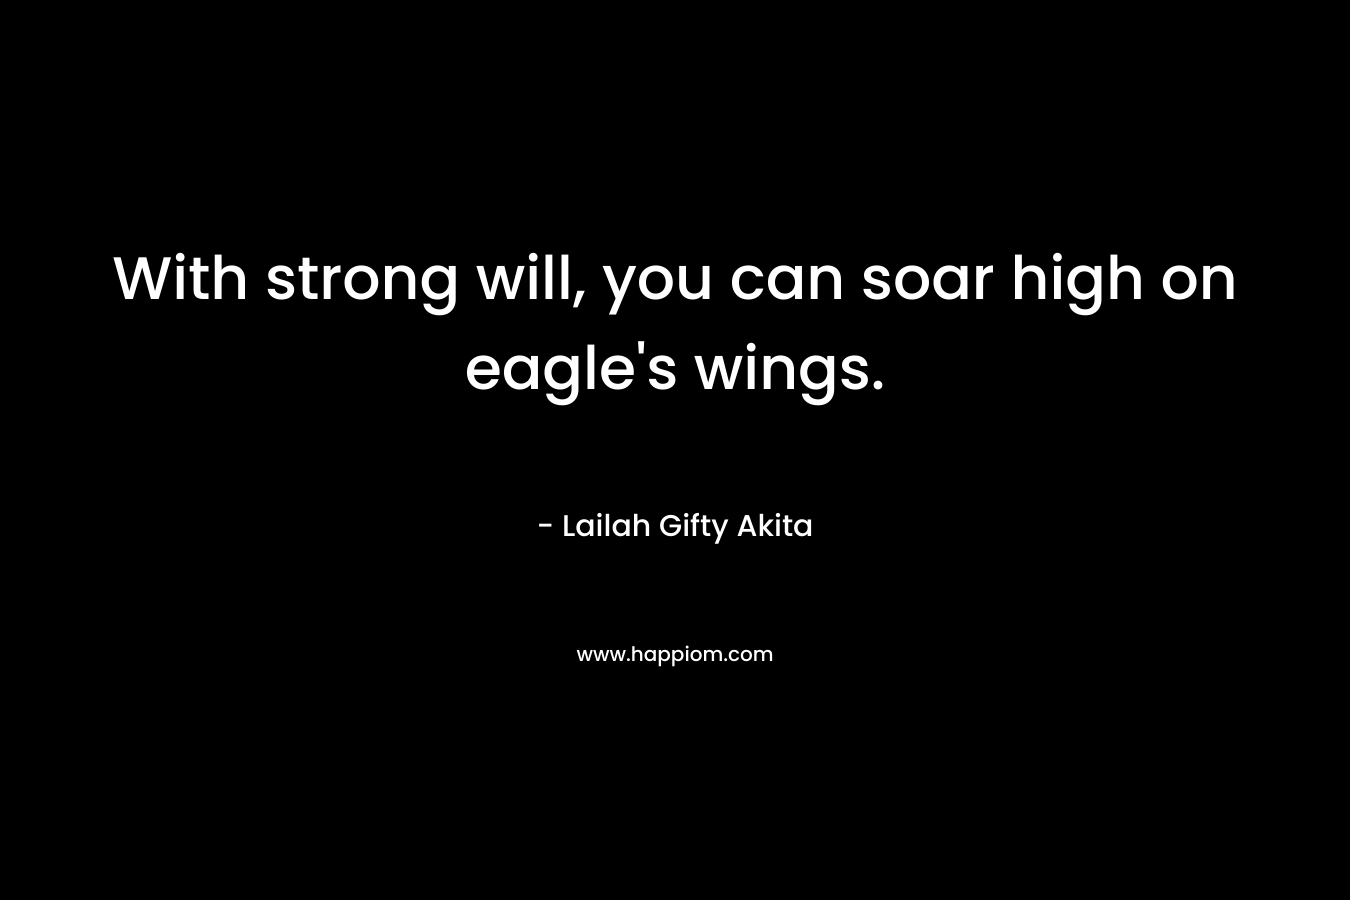 With strong will, you can soar high on eagle's wings.